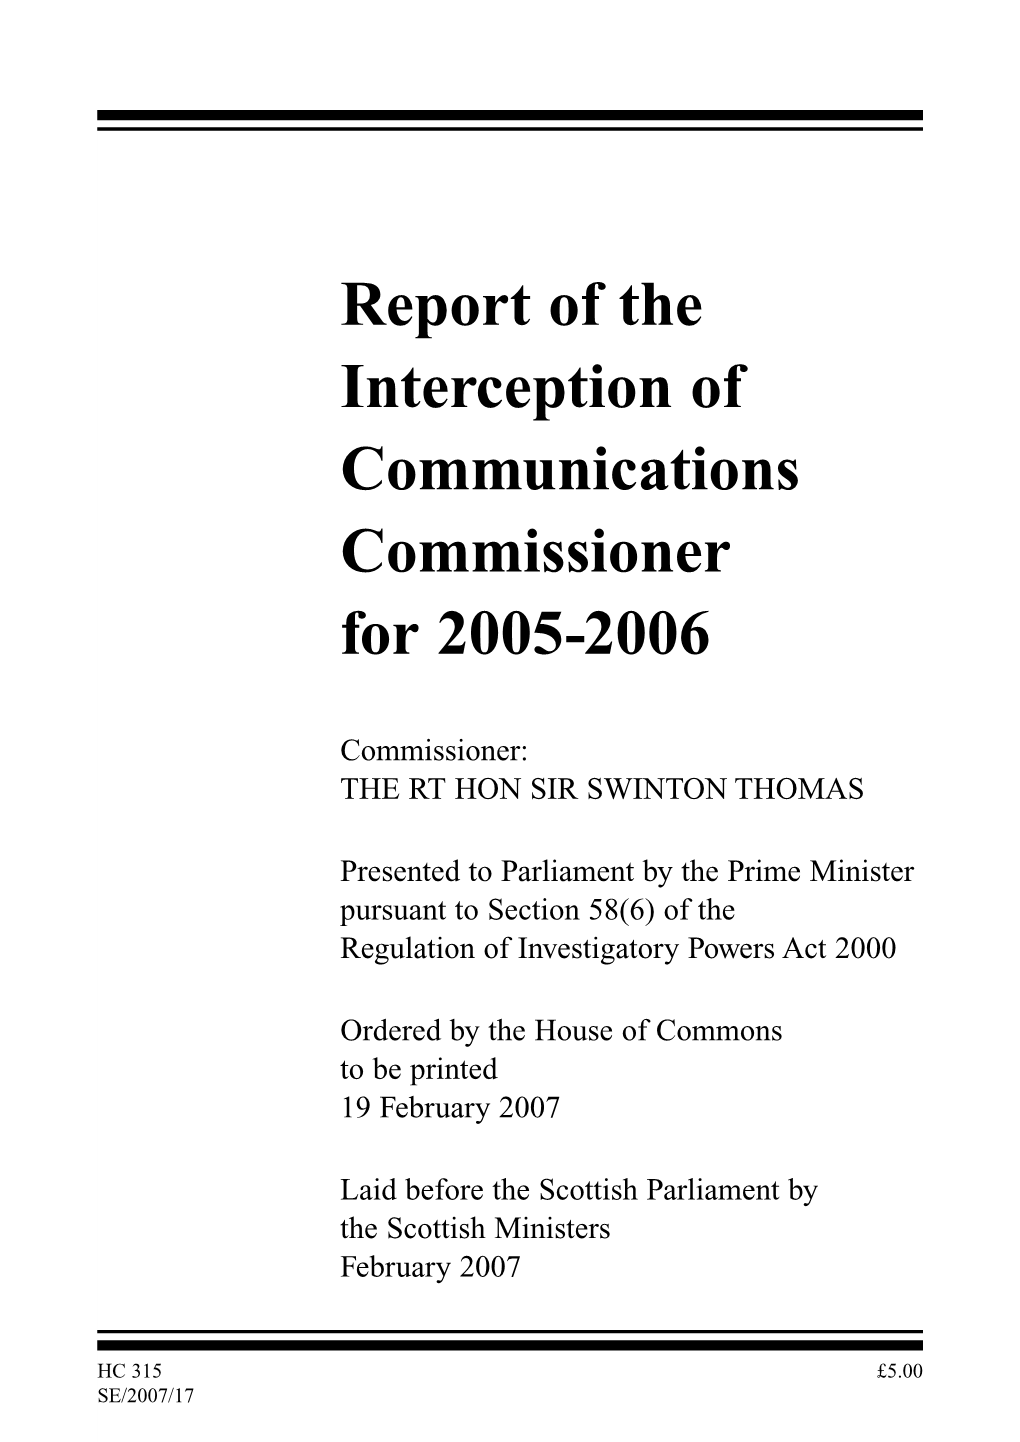 Report of the Interception of Communications Commissioner for 2005-2006